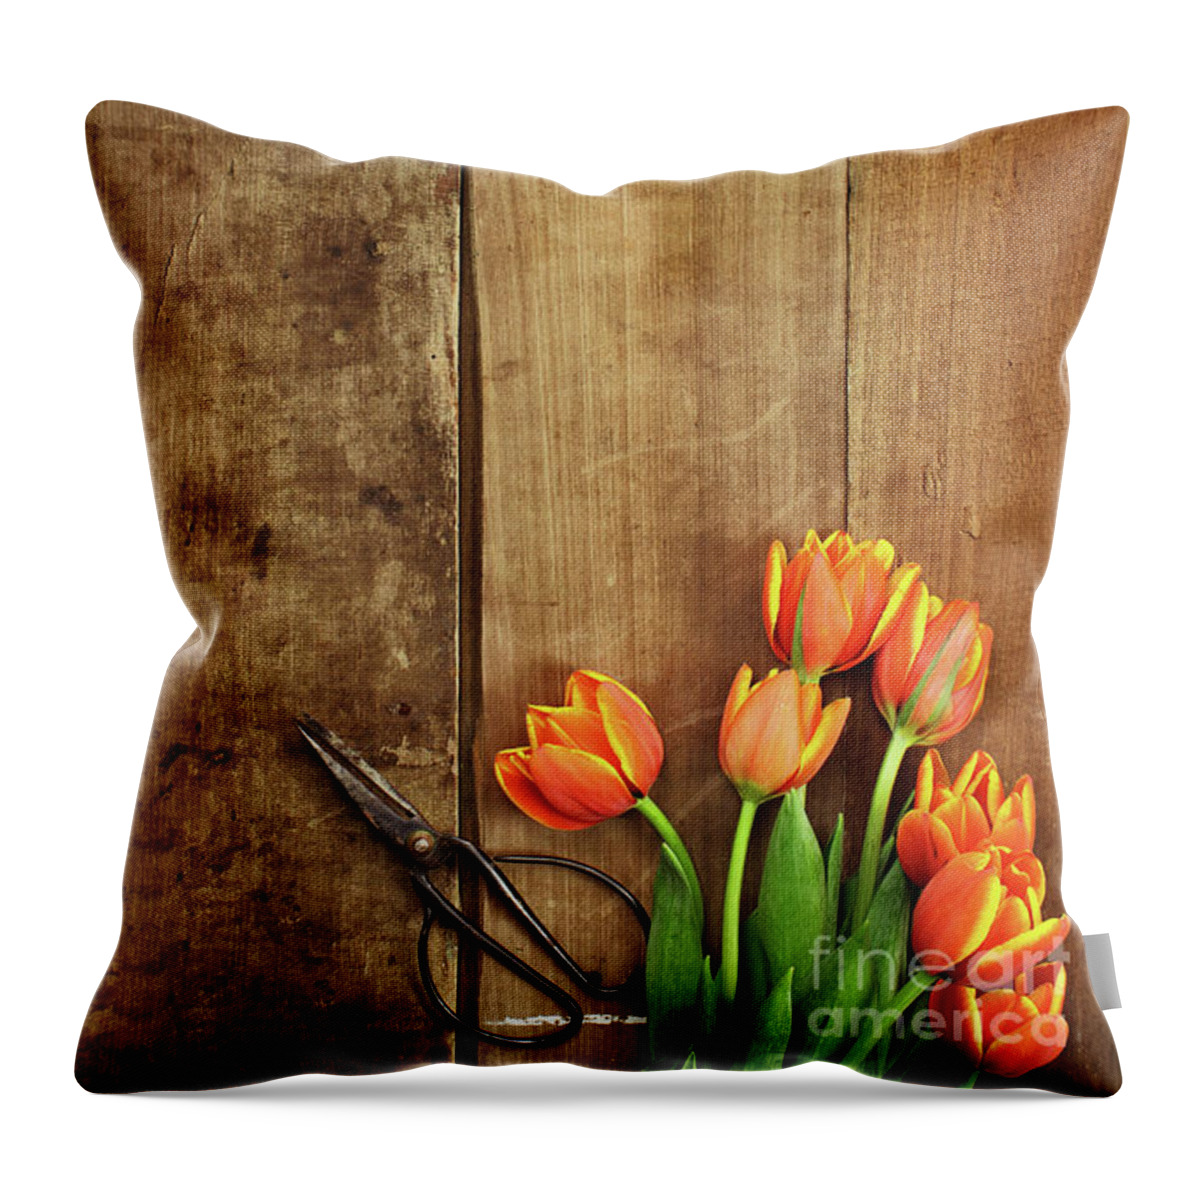 Tulips Throw Pillow featuring the photograph Antique Scissors and Tulips by Stephanie Frey